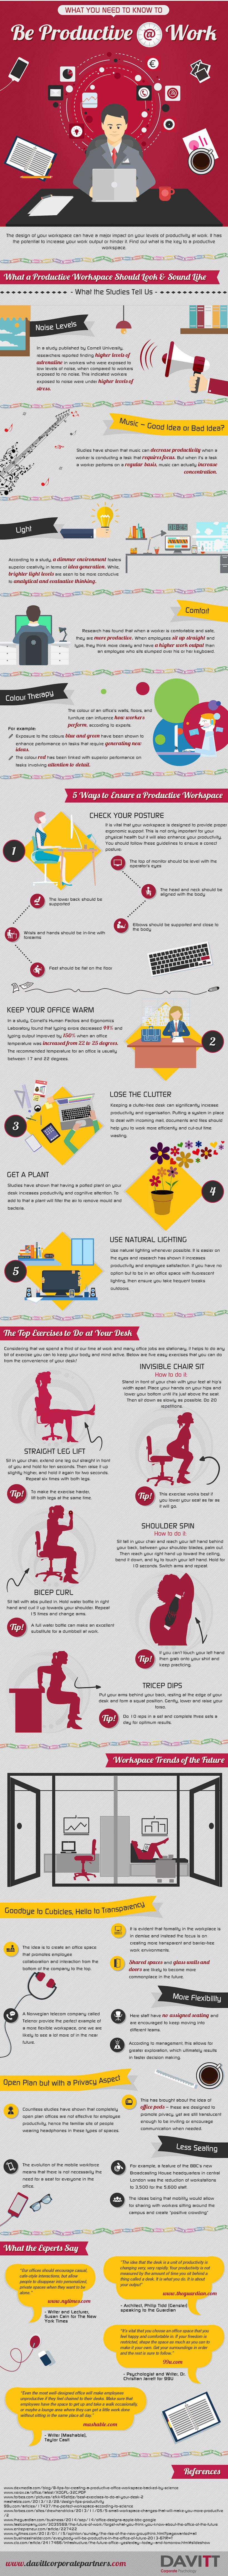 How to Be More Productive at Work Infographic